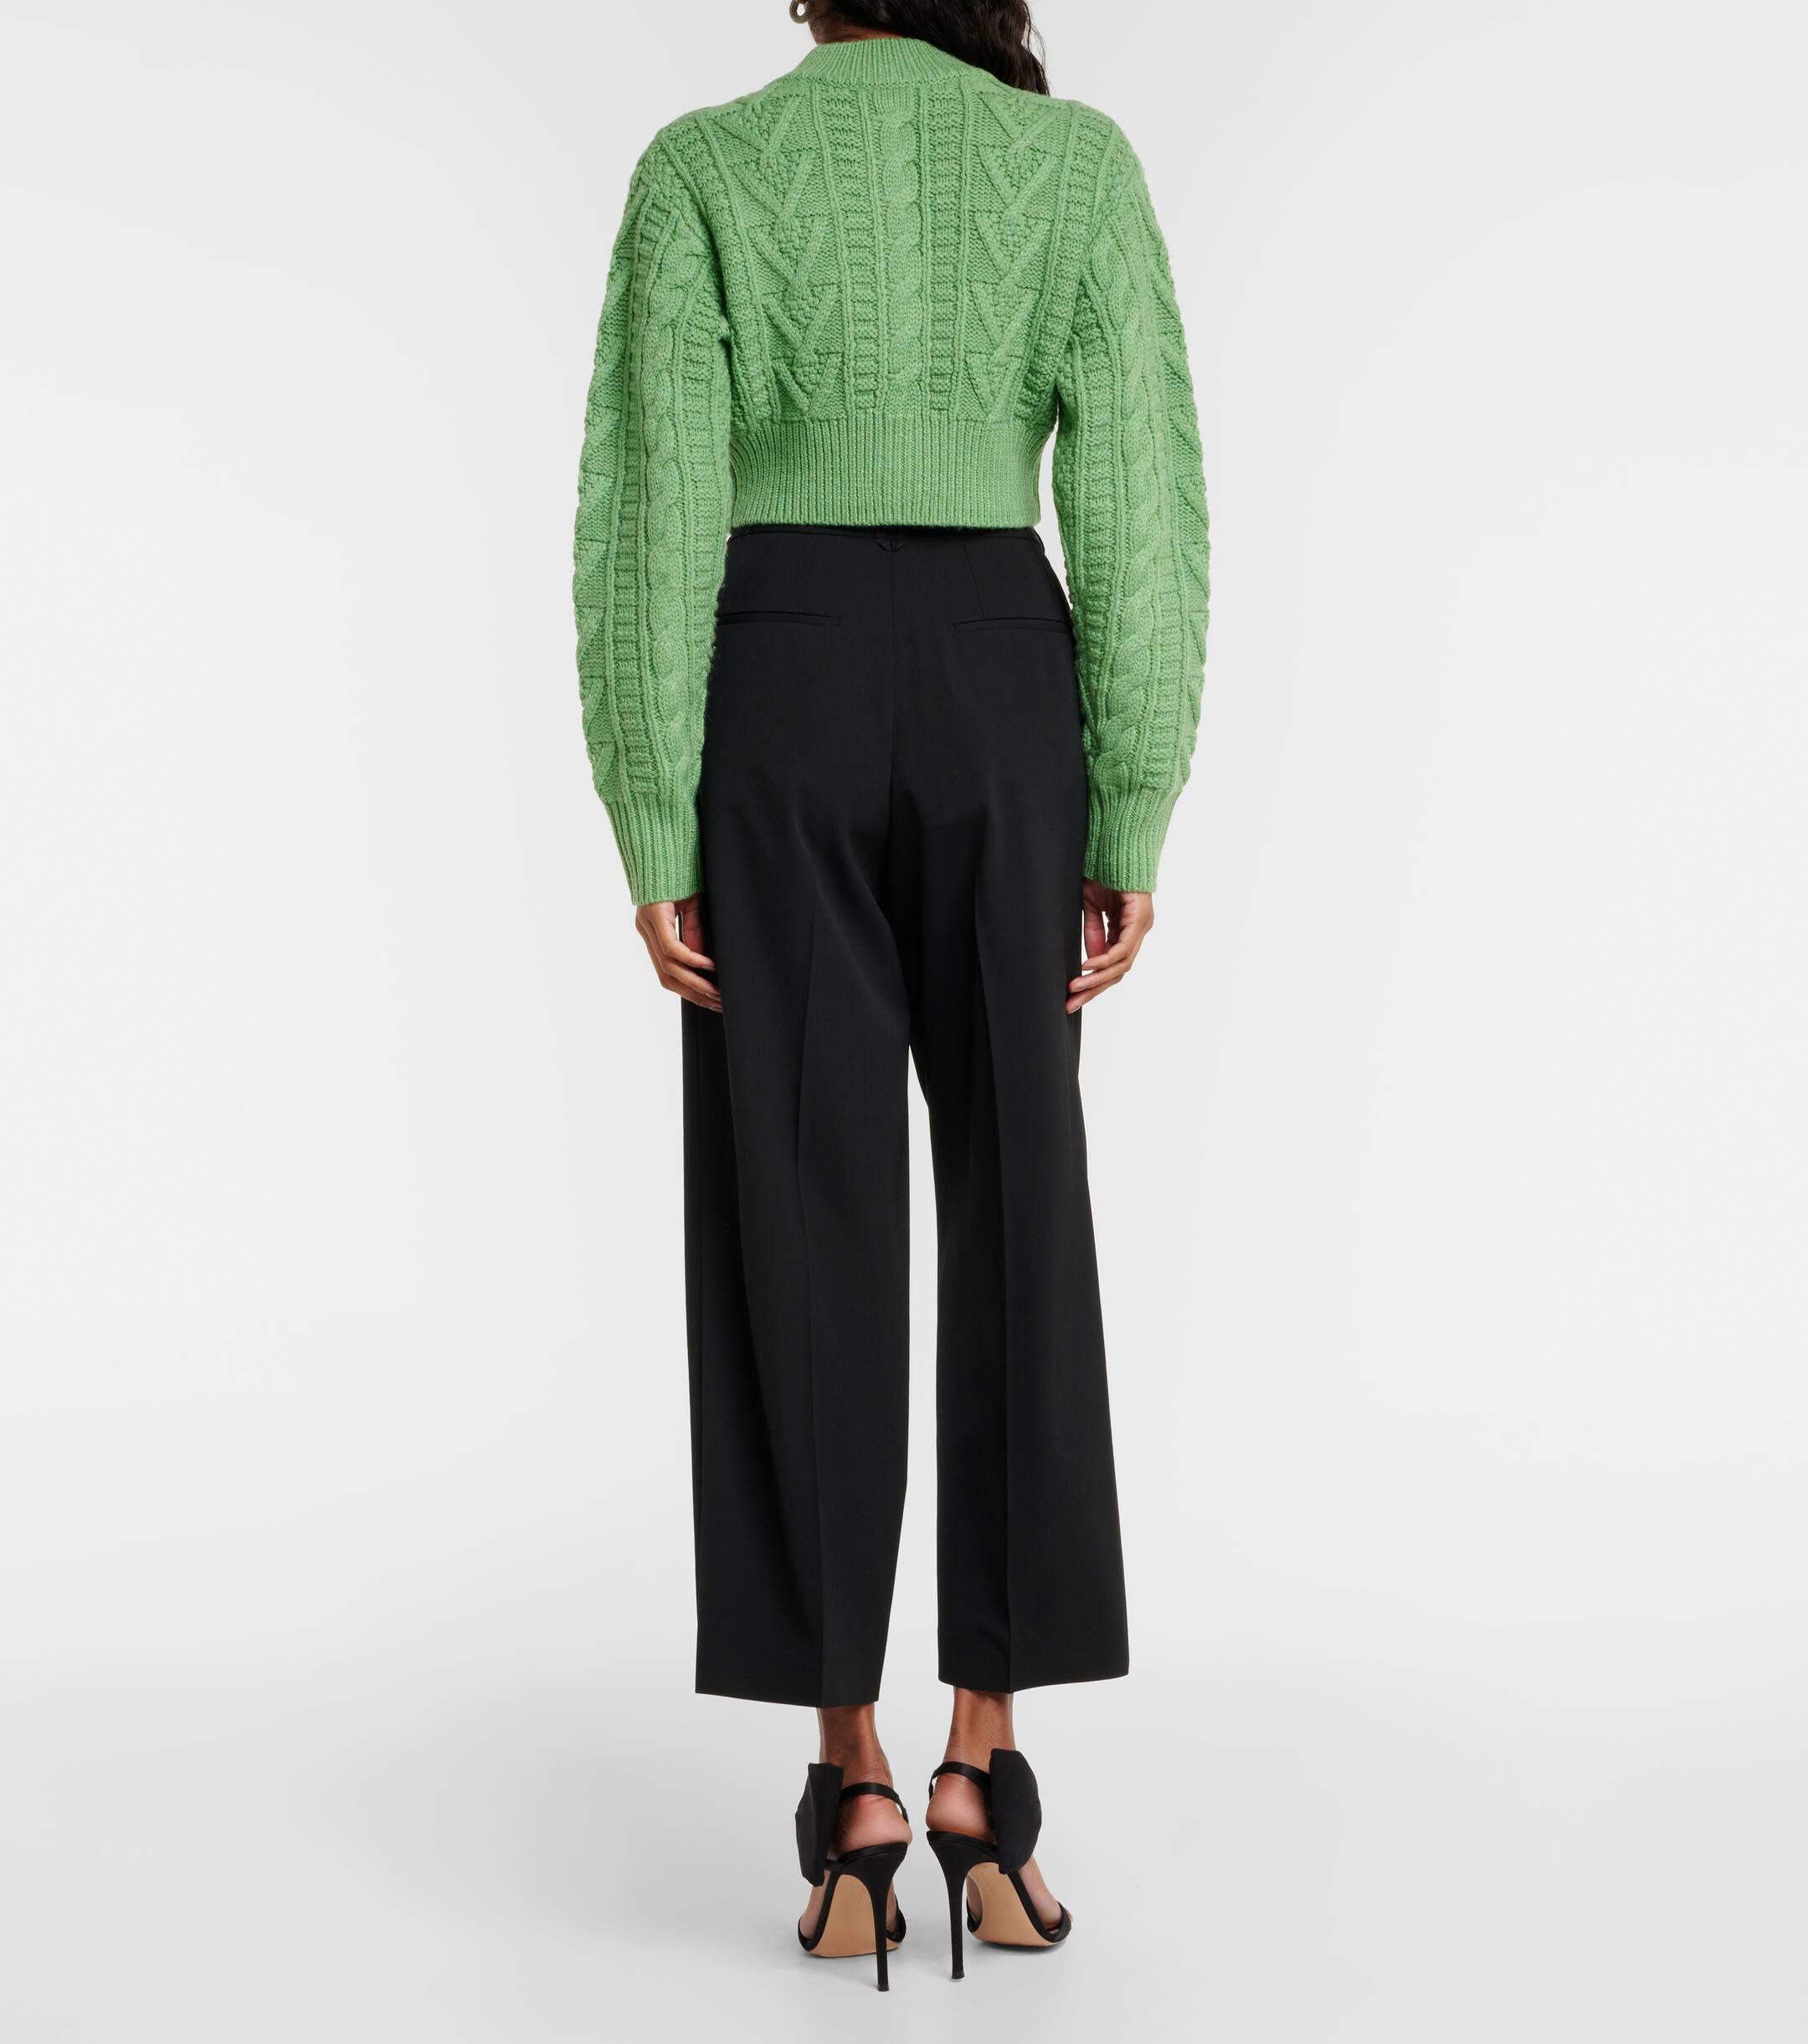 Emilia Wickstead Aleph Cropped Cable-knit Wool Cardigan in Green | Lyst UK